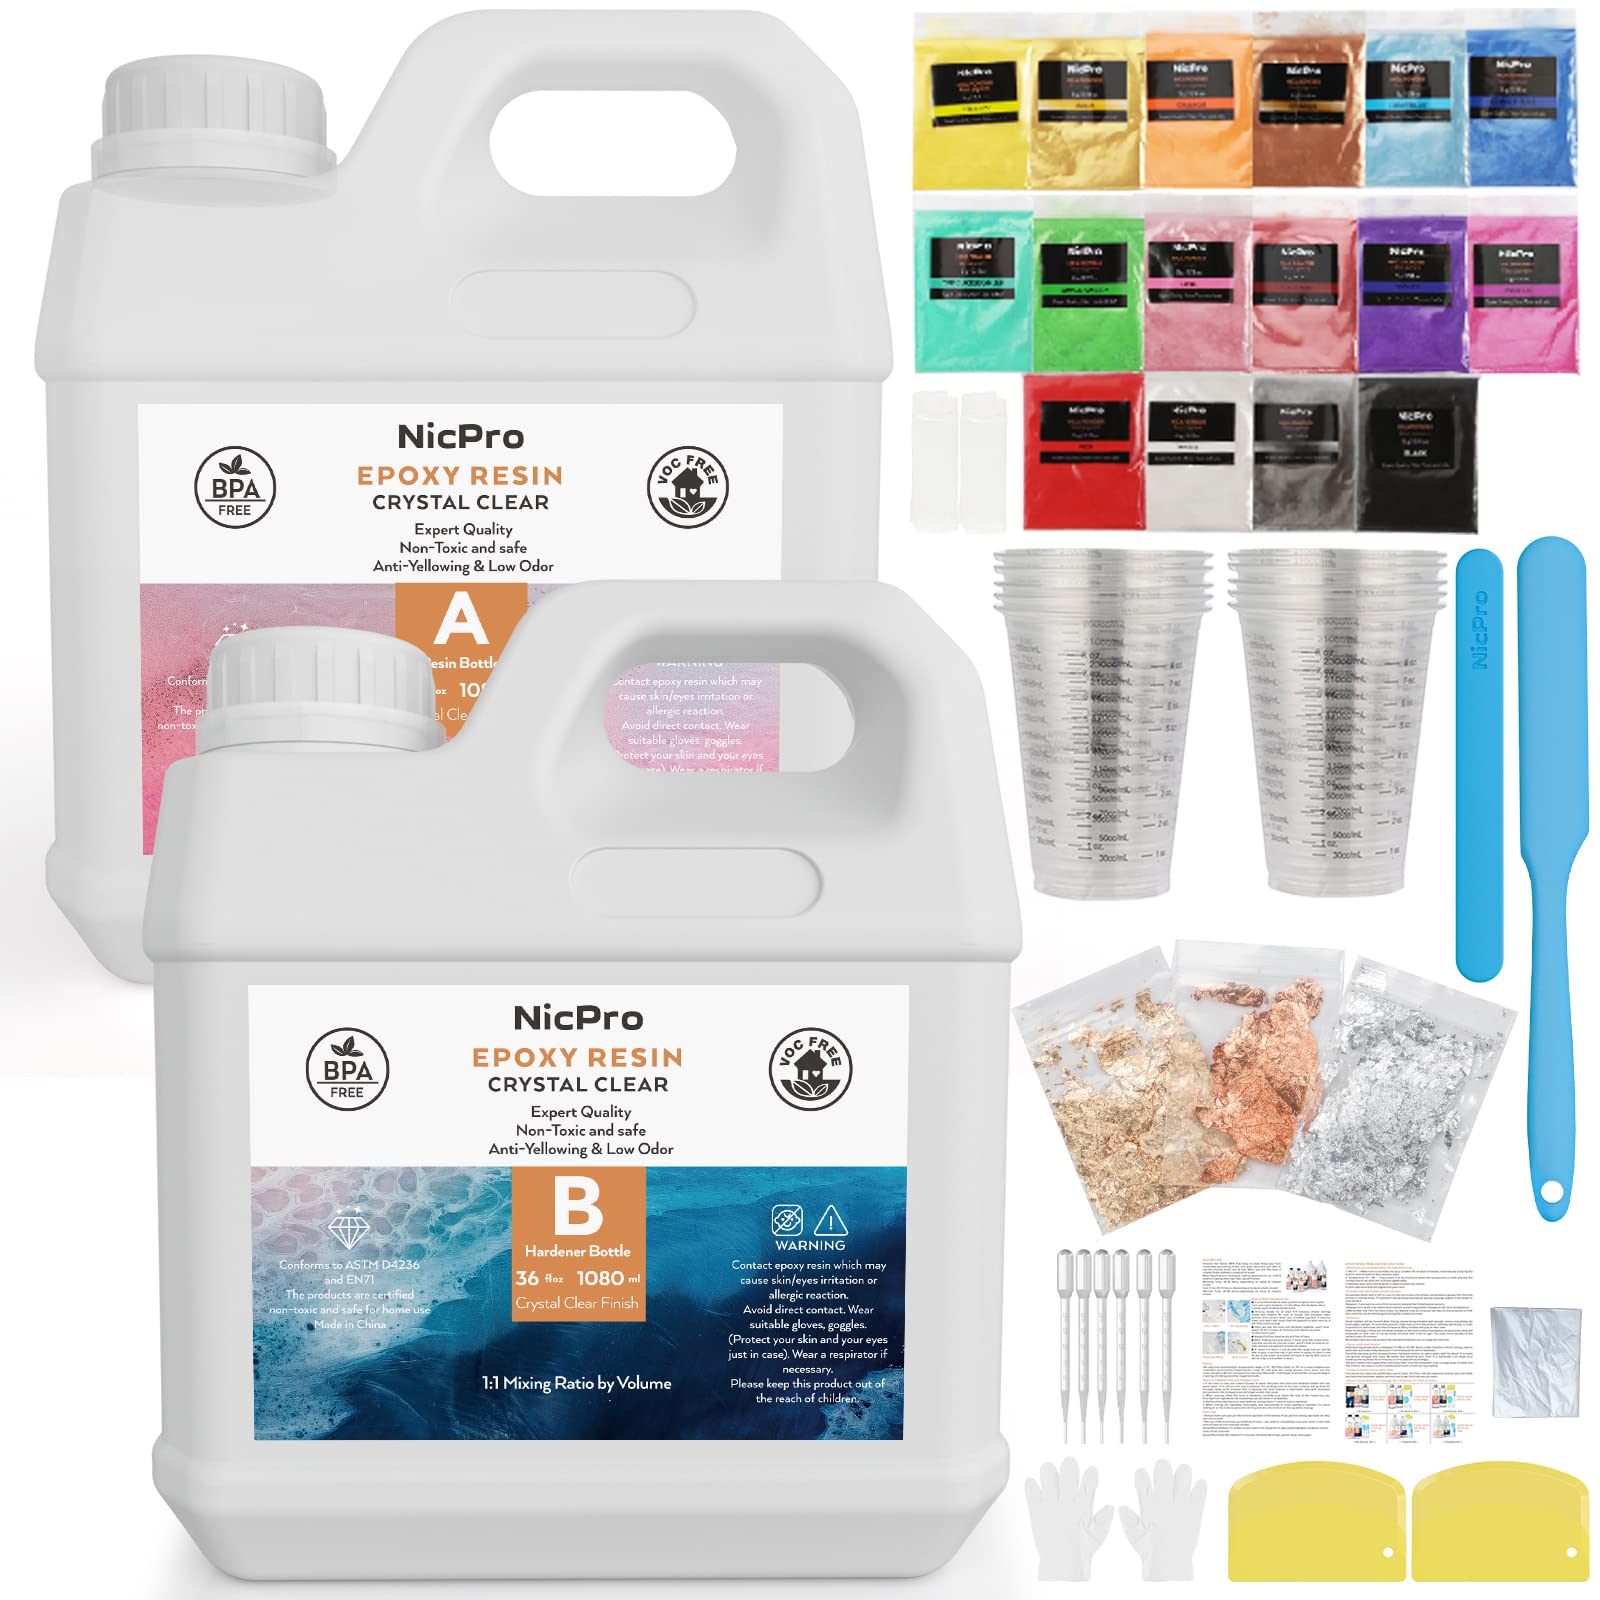  Nicpro 64OZ Crystal Clear Epoxy Resin Kit, High